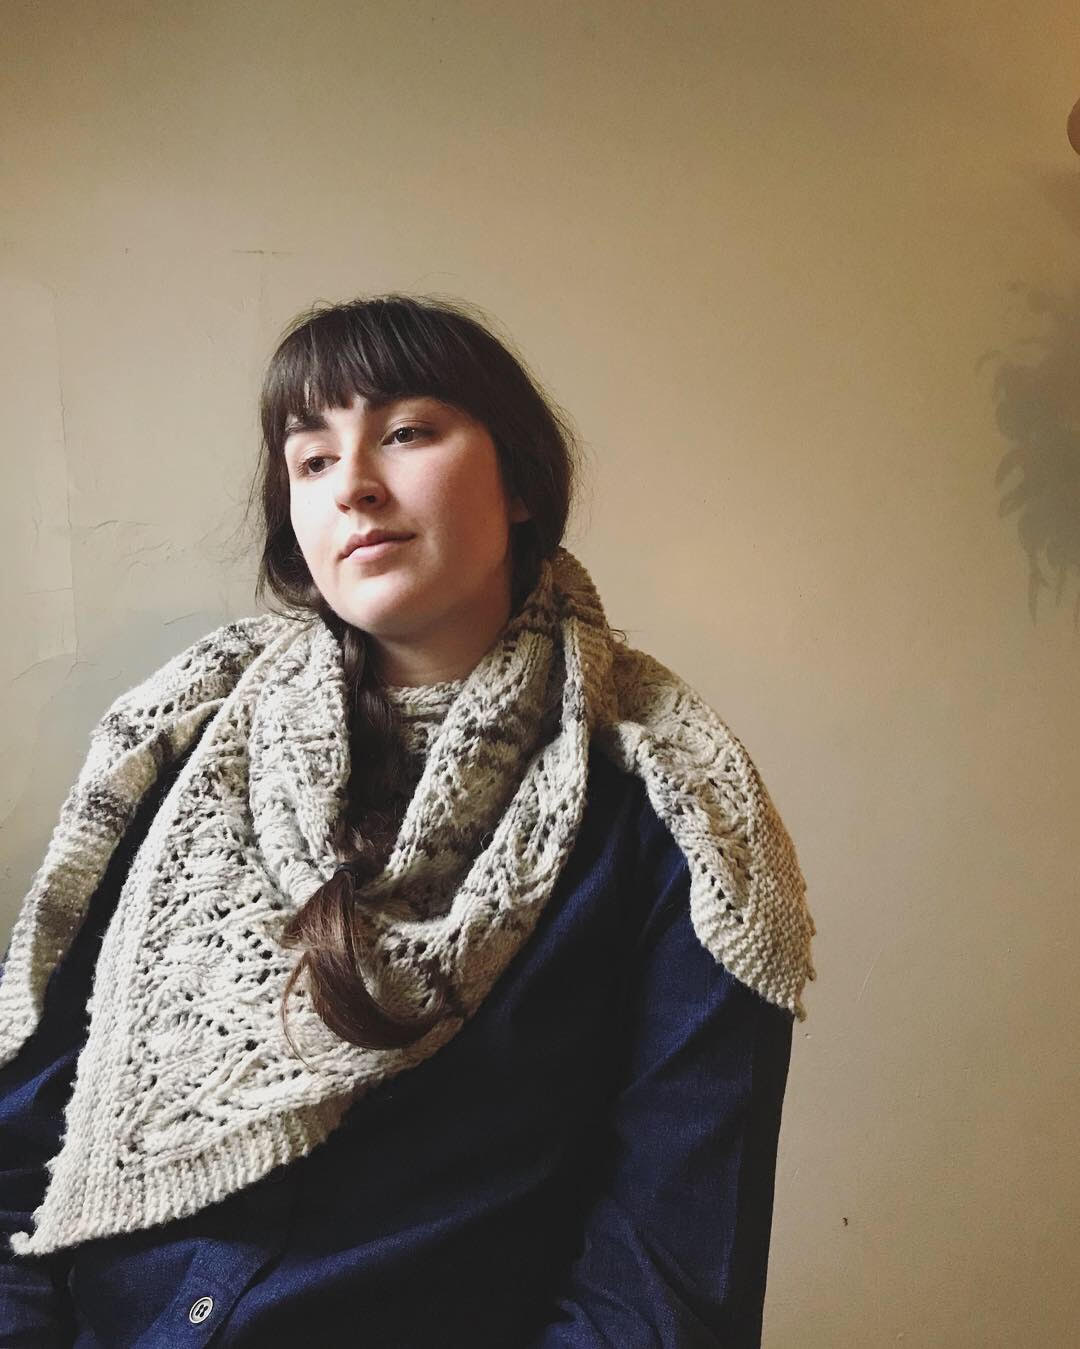 Portrait of Caroline Vogl sitting in front of a beige wall, wearing a blue button-down top and knitted, off-white scarf